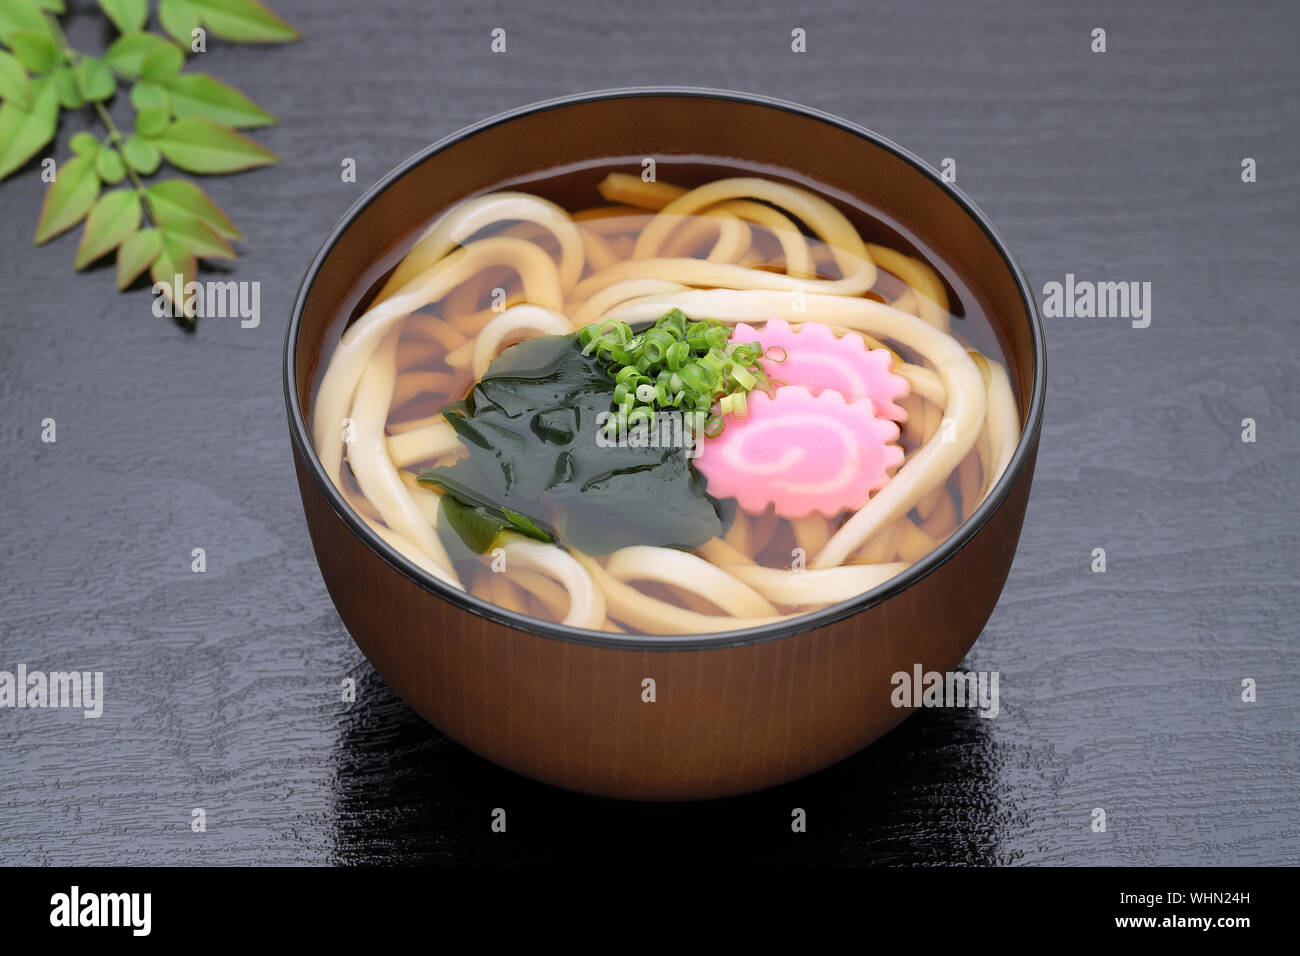 Japanese Kake udon noodles in a bowl Stock Photo